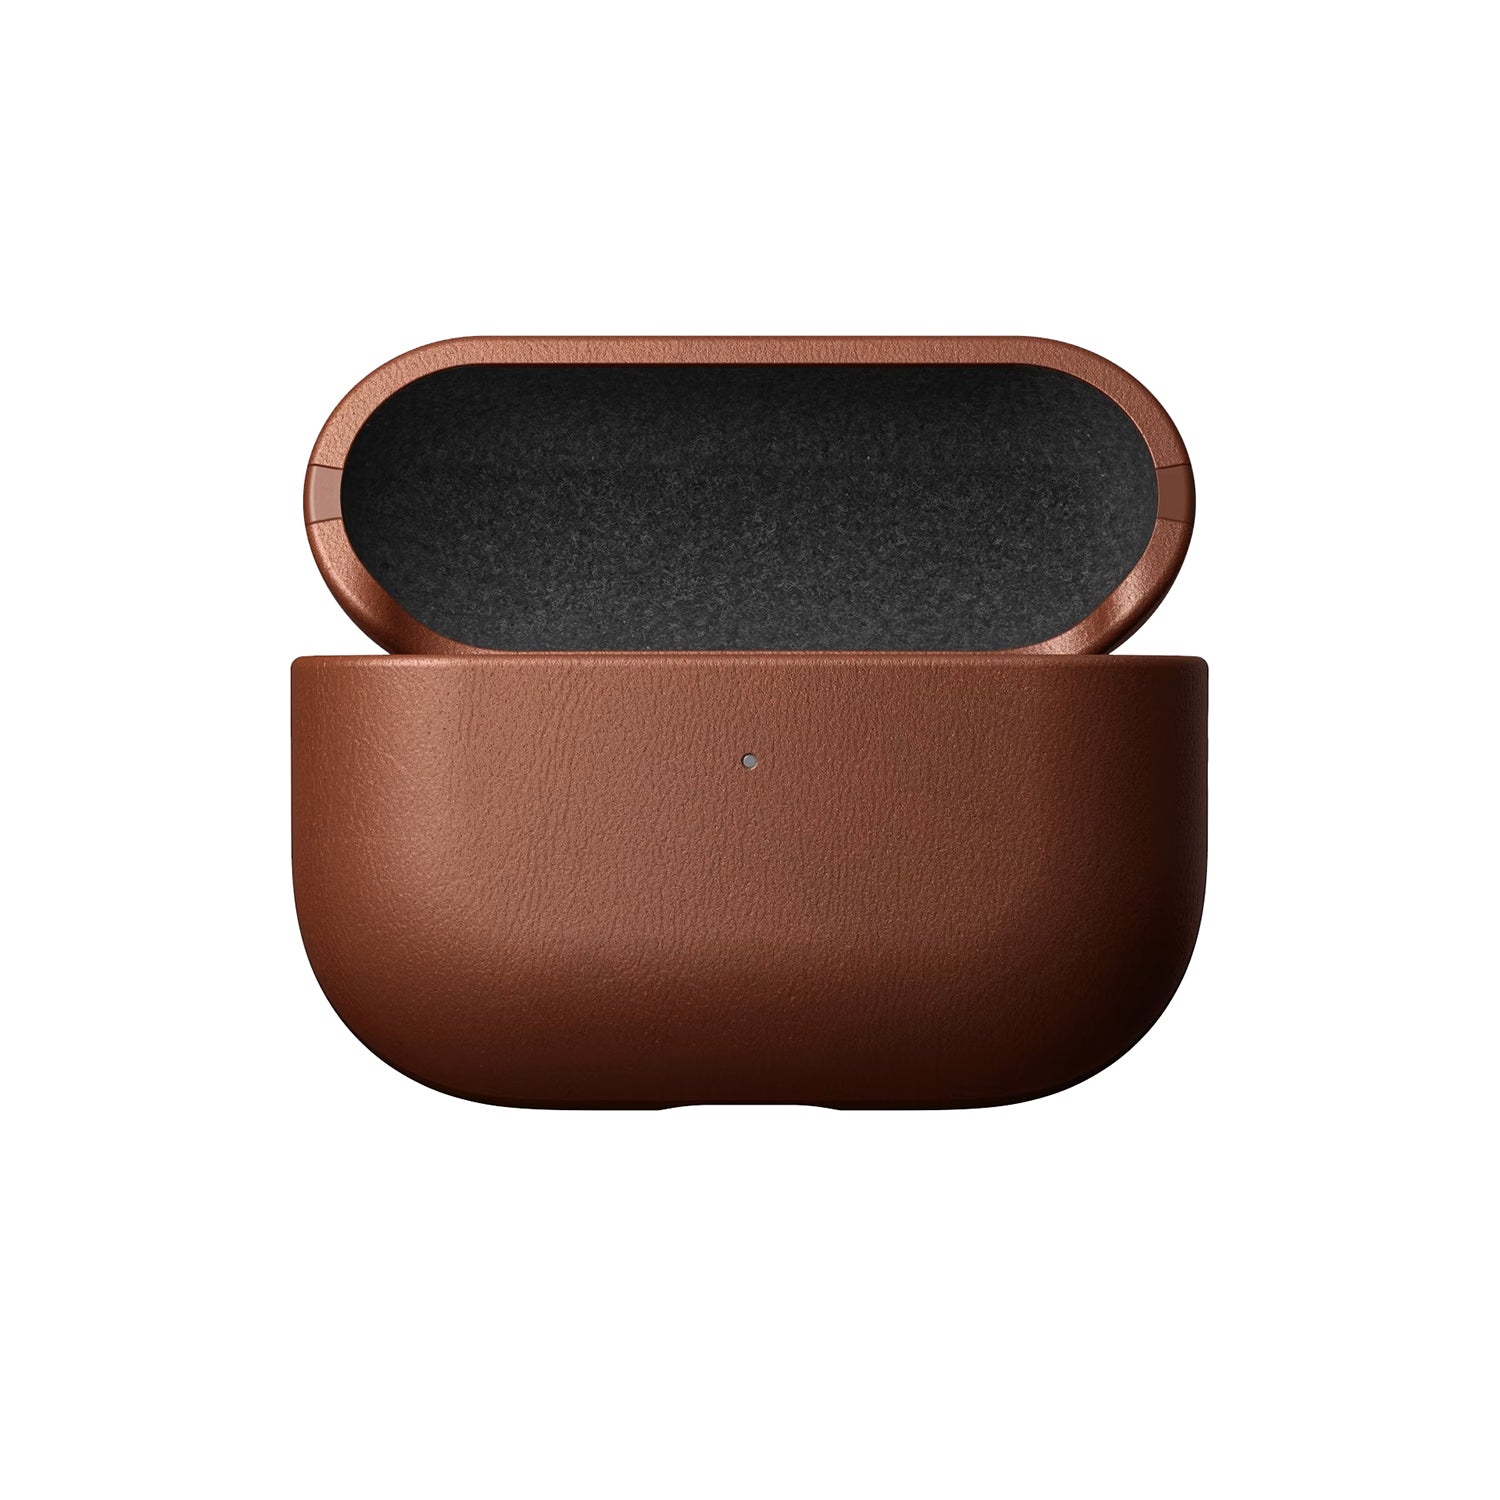 NOMAD Modern Leather Case for Airpods Pro 2/Airpods Pro1 By Nomad Leather AirPods Case NOMAD 